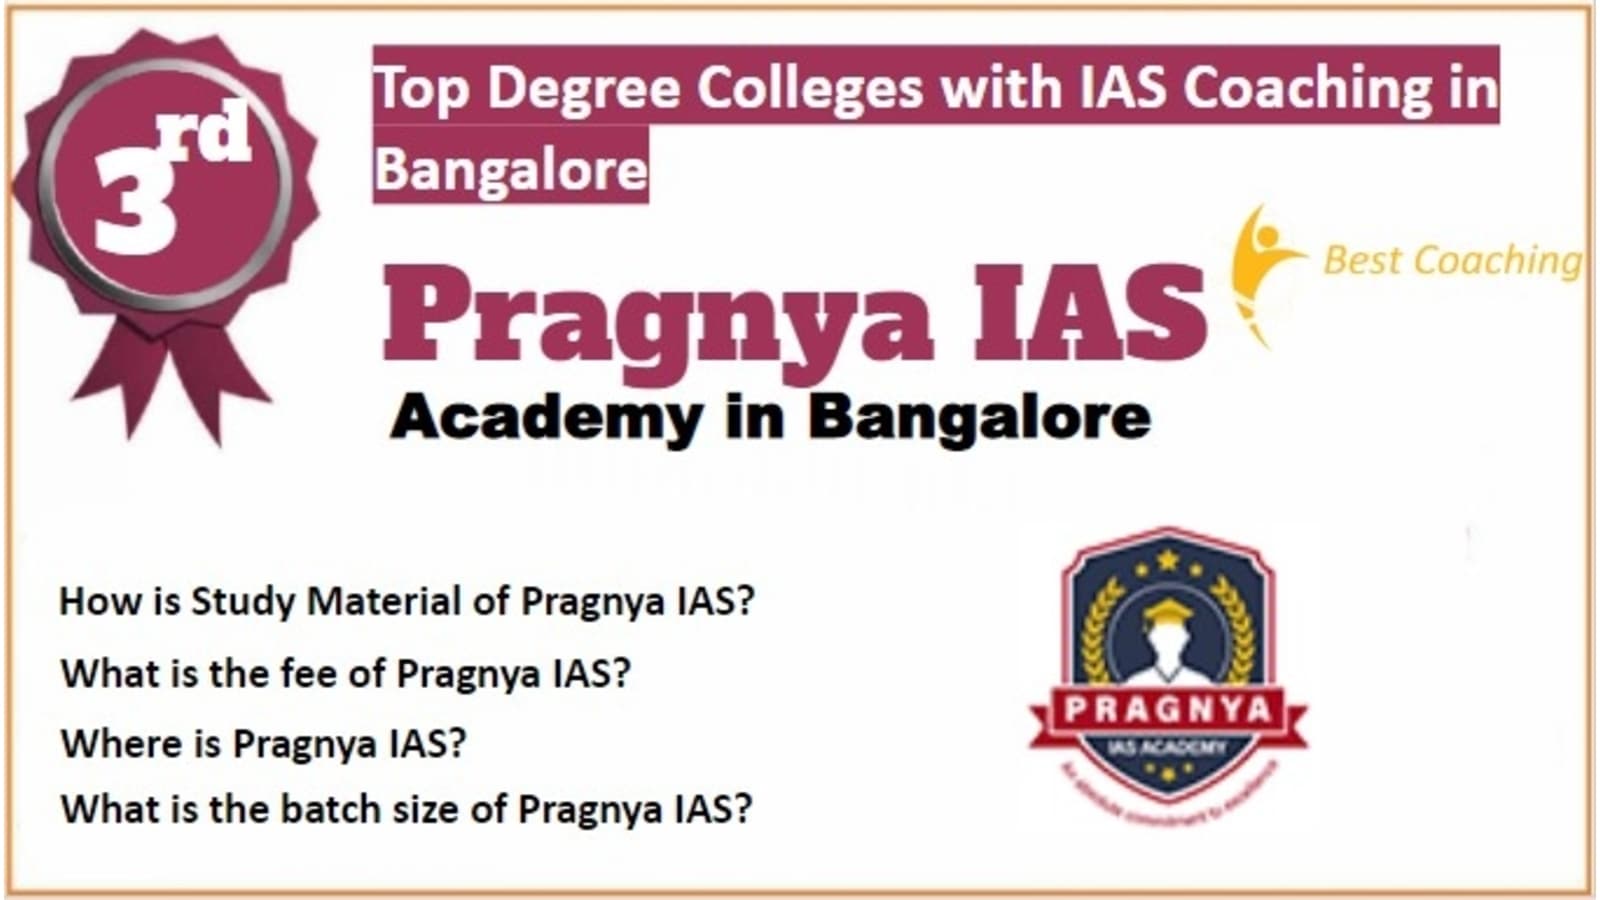 Rank 3 Best Degree Colleges with IAS Coaching in Bangalore